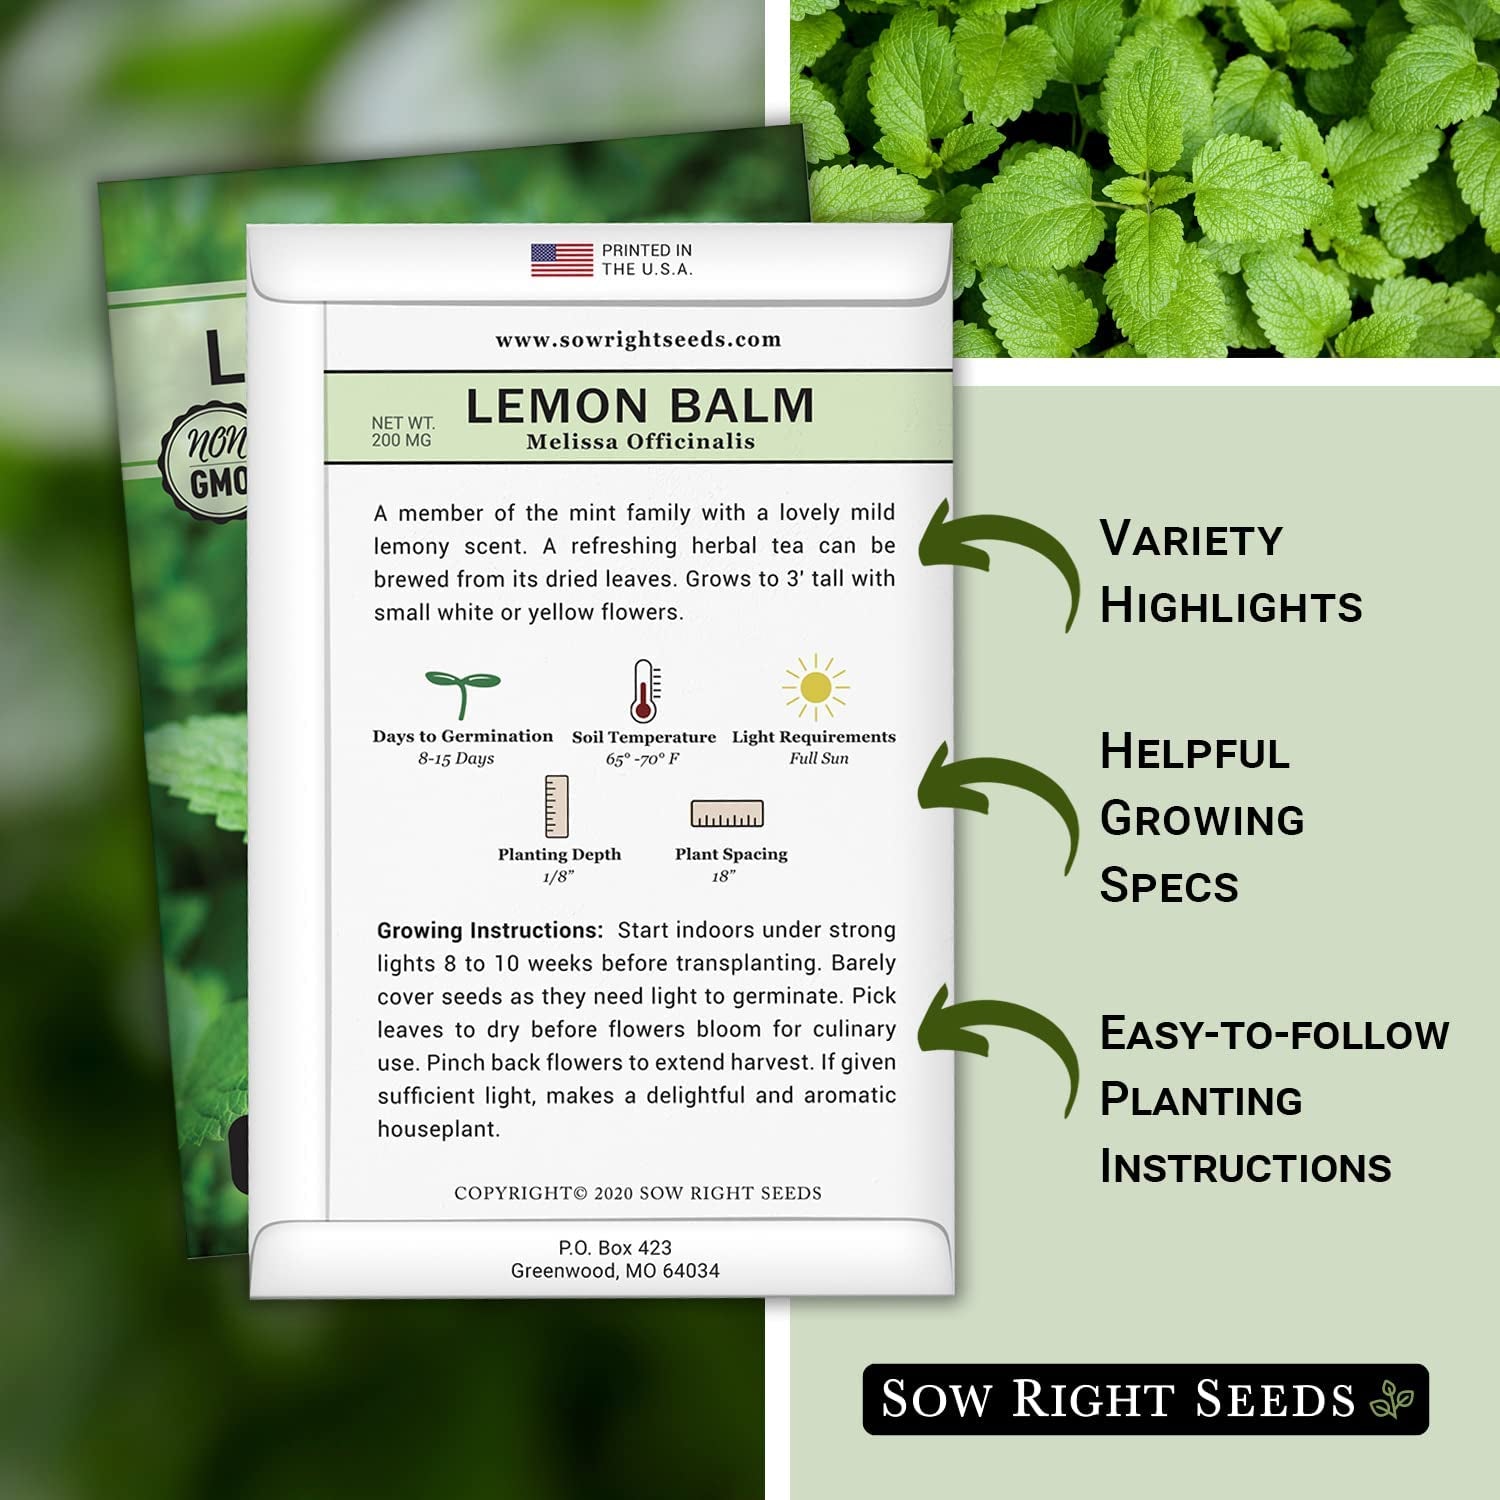 - Lemon Balm Seeds for Planting - Non-Gmo Heirloom Packet with Instructions - Easy to Grow Herb Garden - Aromatic Medicinal Herb and Great for Herbal Teas - Perennial Mint Relative